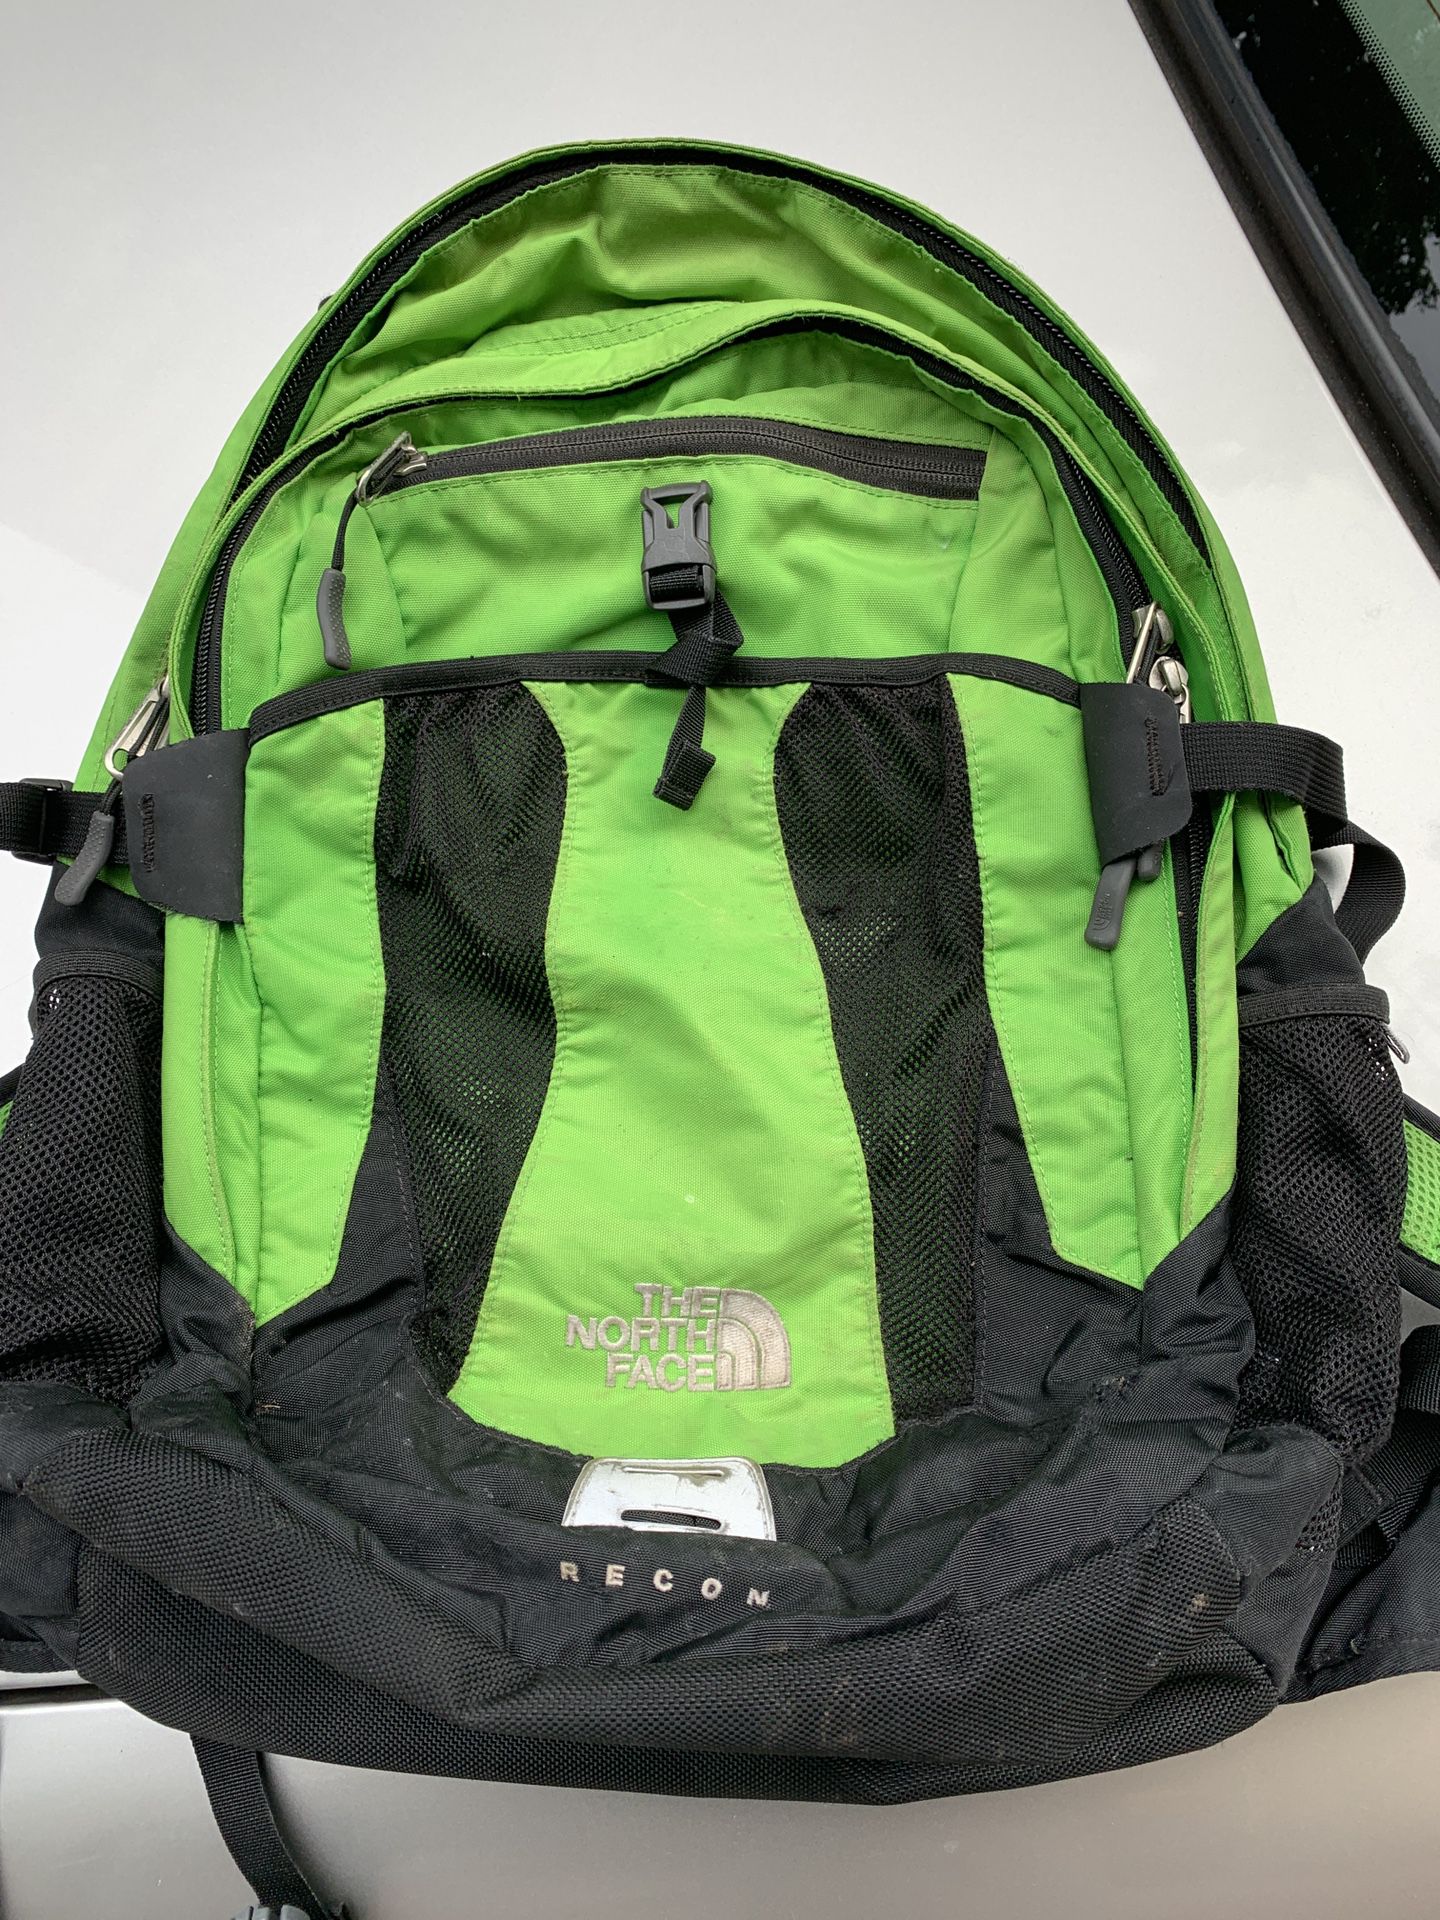 The north face recon green backpack